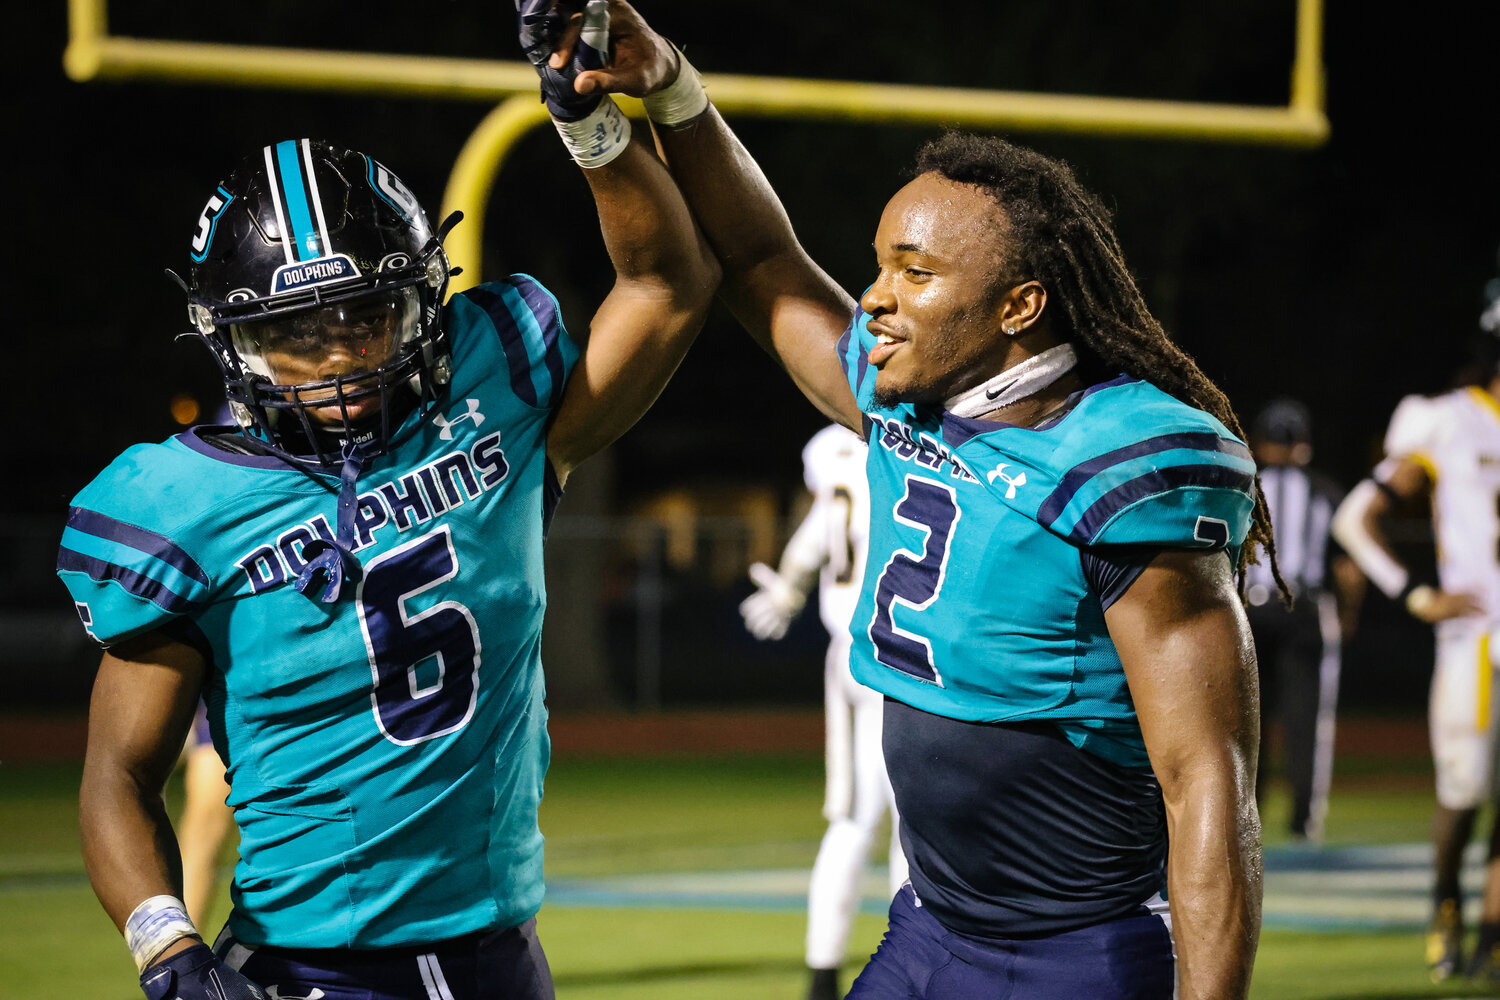 Junior Kolin Wilson and senior Ronnie Royal celebrate Wilson's second touchdown of the night on Friday, Oct. 6, at the Gulf Shores Sportsplex as part of the Dolphins’ 45-13 win over Williamson. Both athletes registered two touchdowns each to help extend Gulf Shores’ season-opening win streak to seven games.